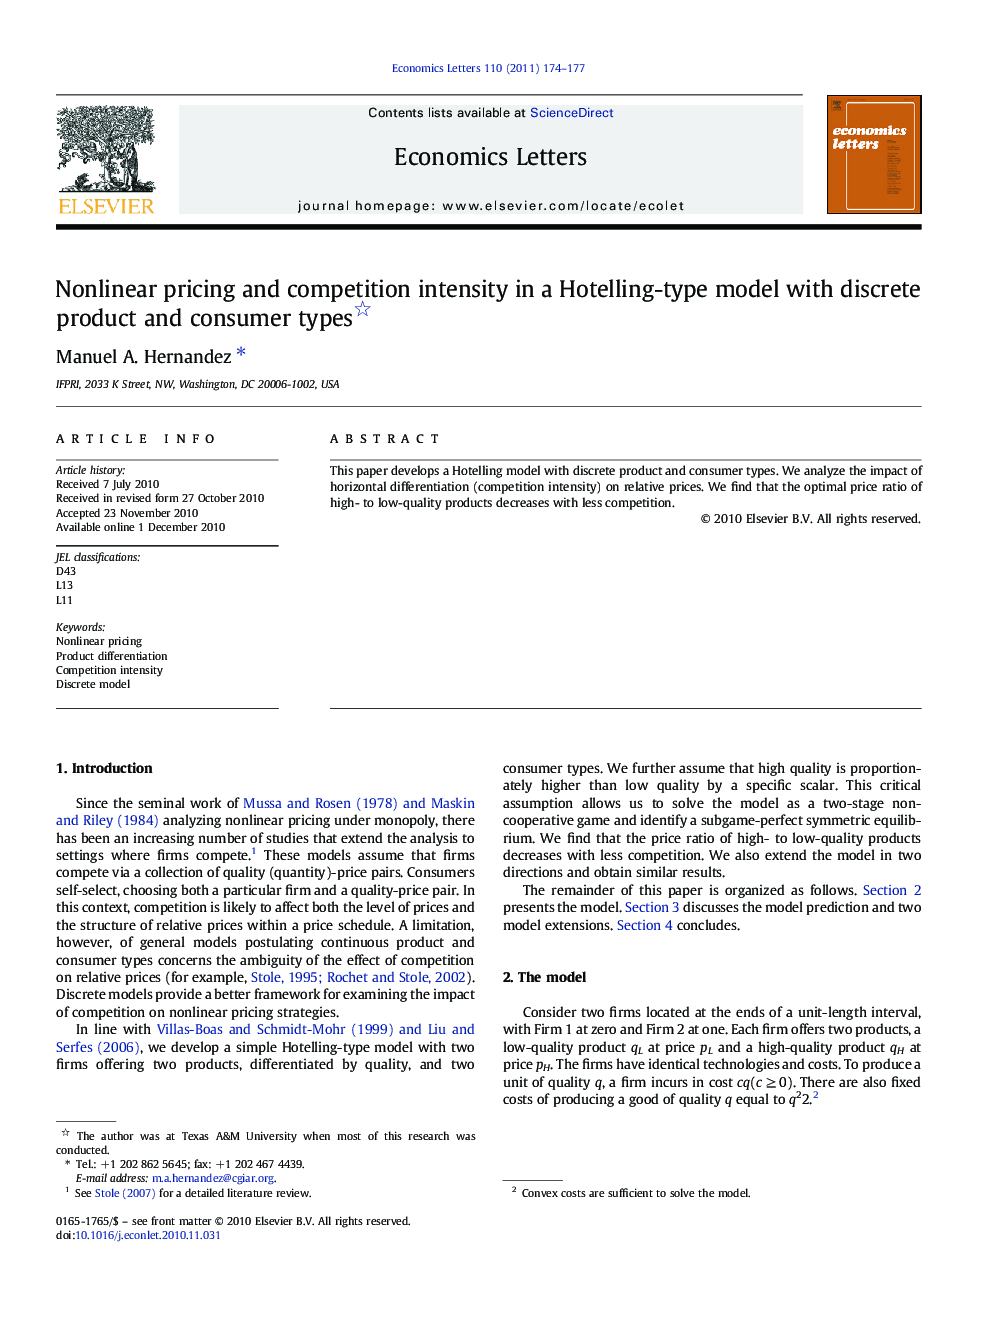 Nonlinear pricing and competition intensity in a Hotelling-type model with discrete product and consumer types